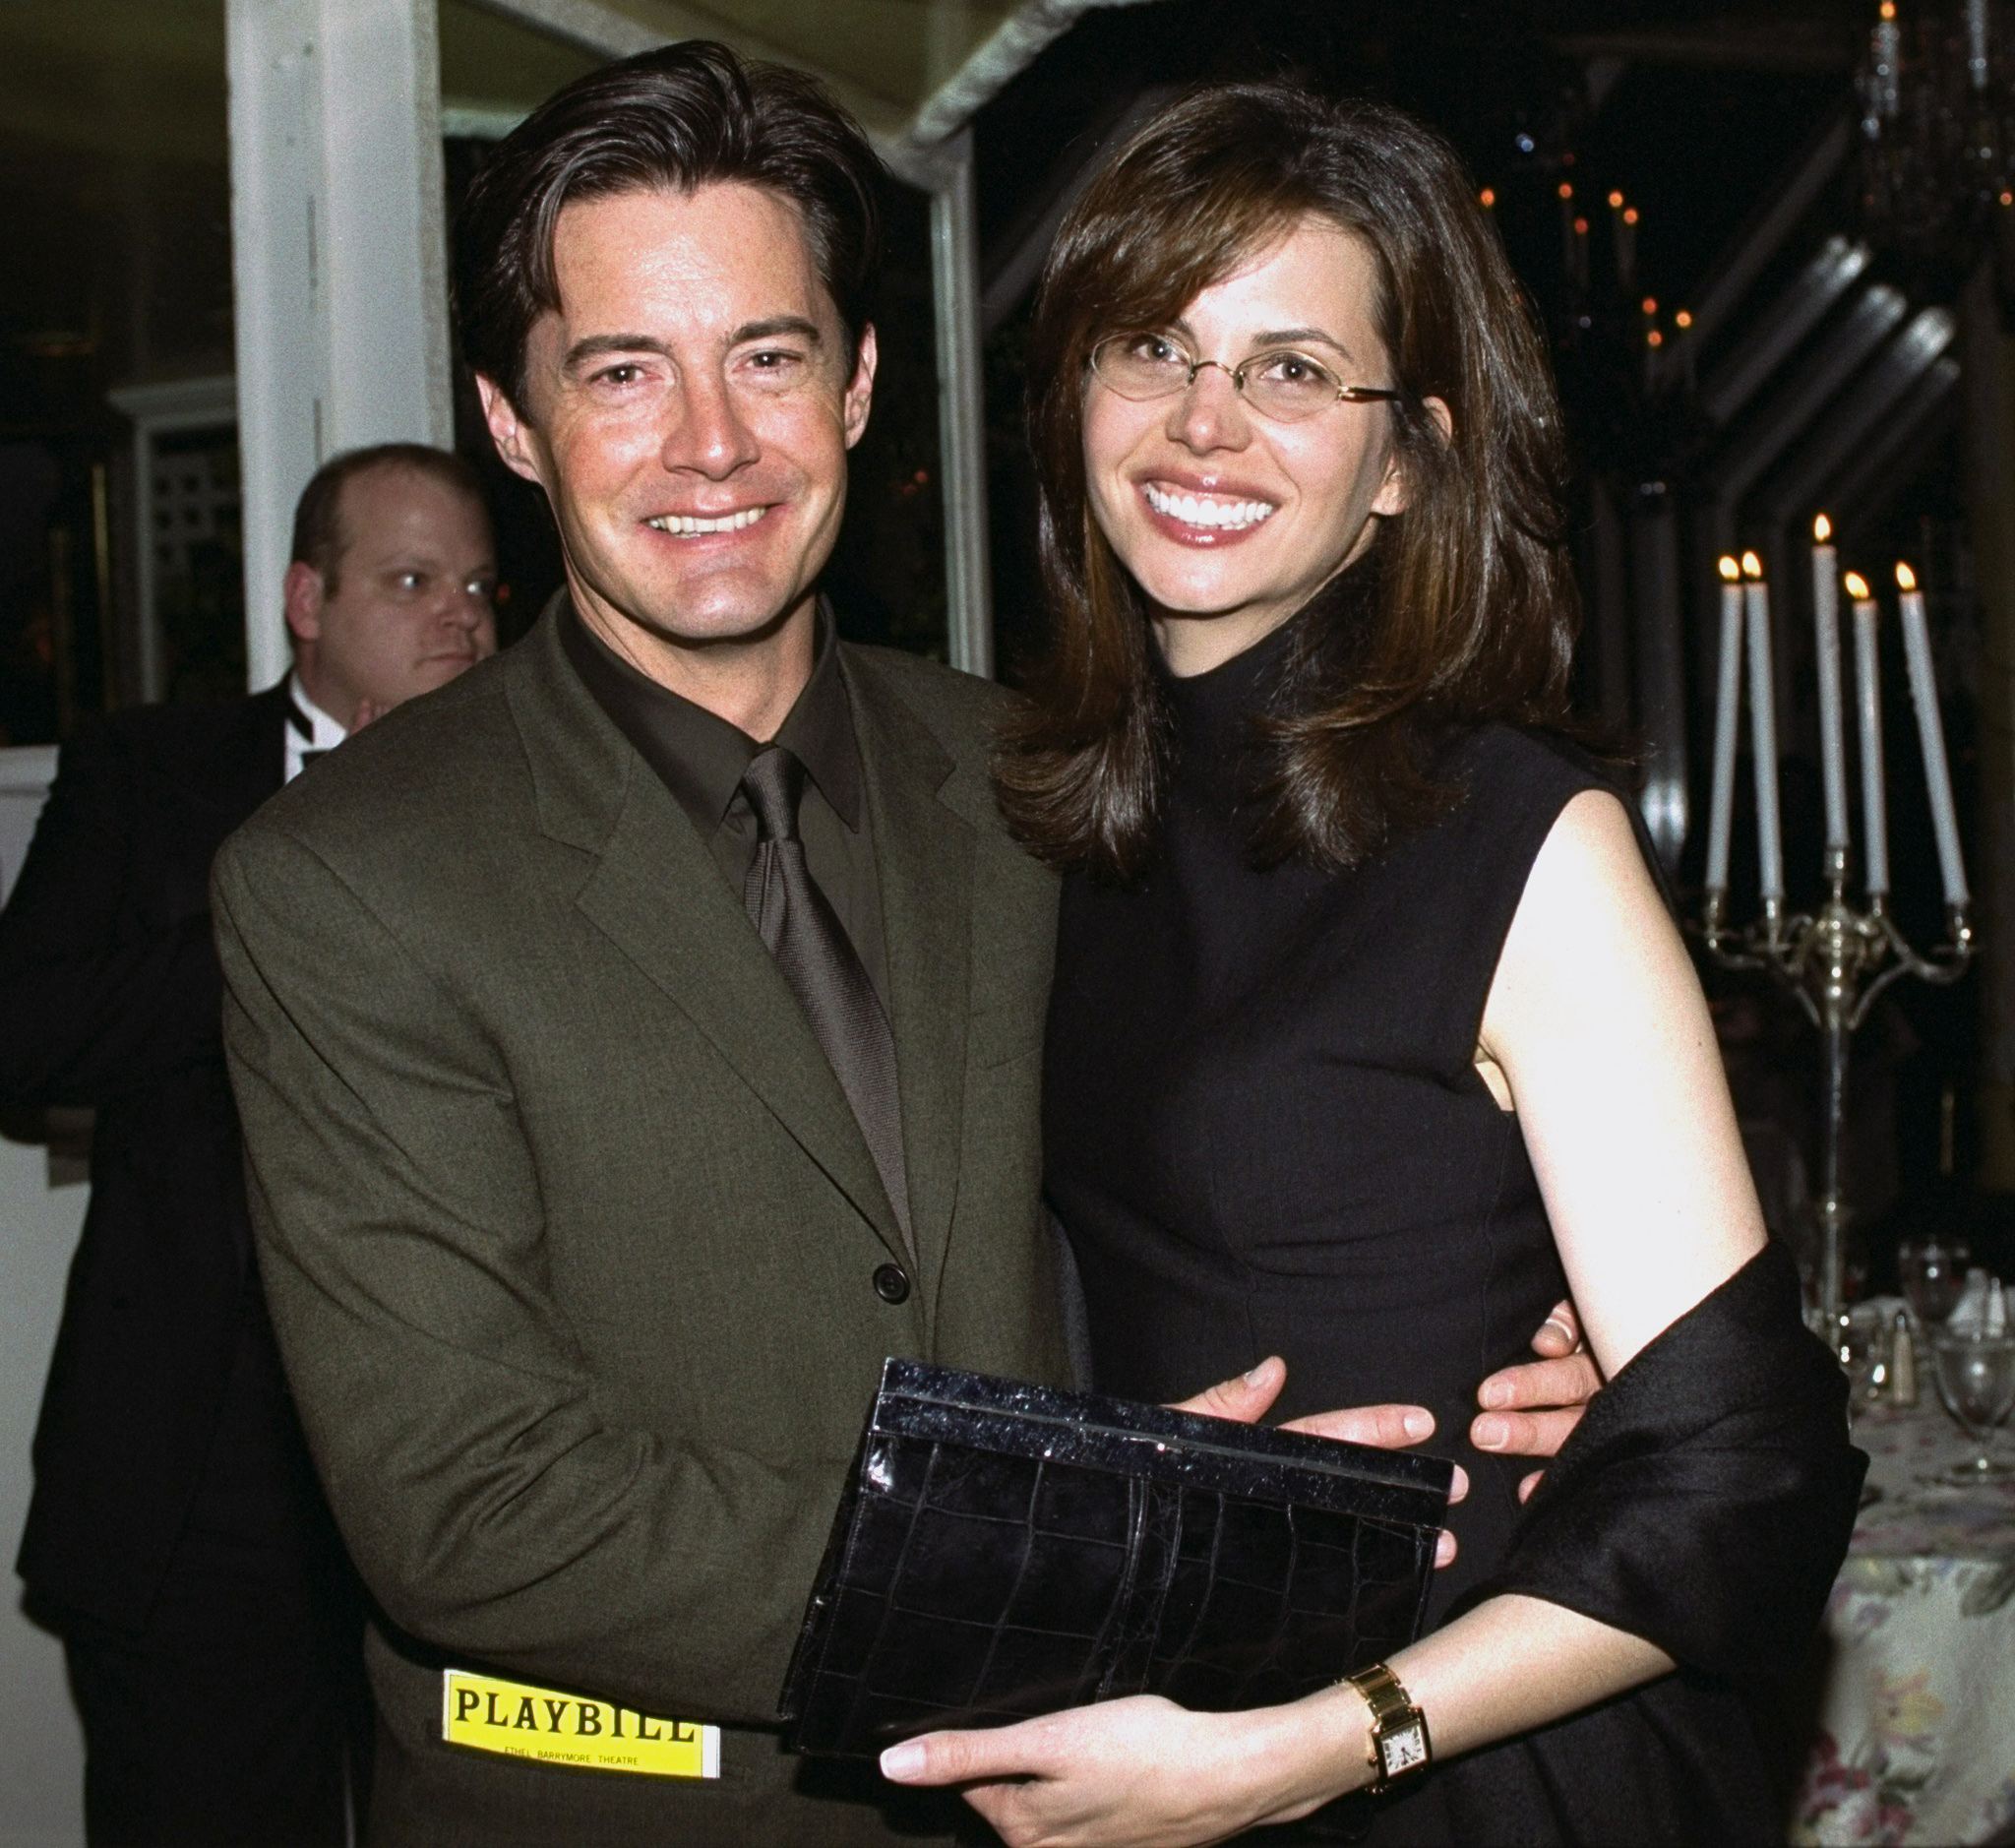 Kyle MacLachlan and Desiree Gruber at opening party for the play "The Real Thing." | Source: Getty Images